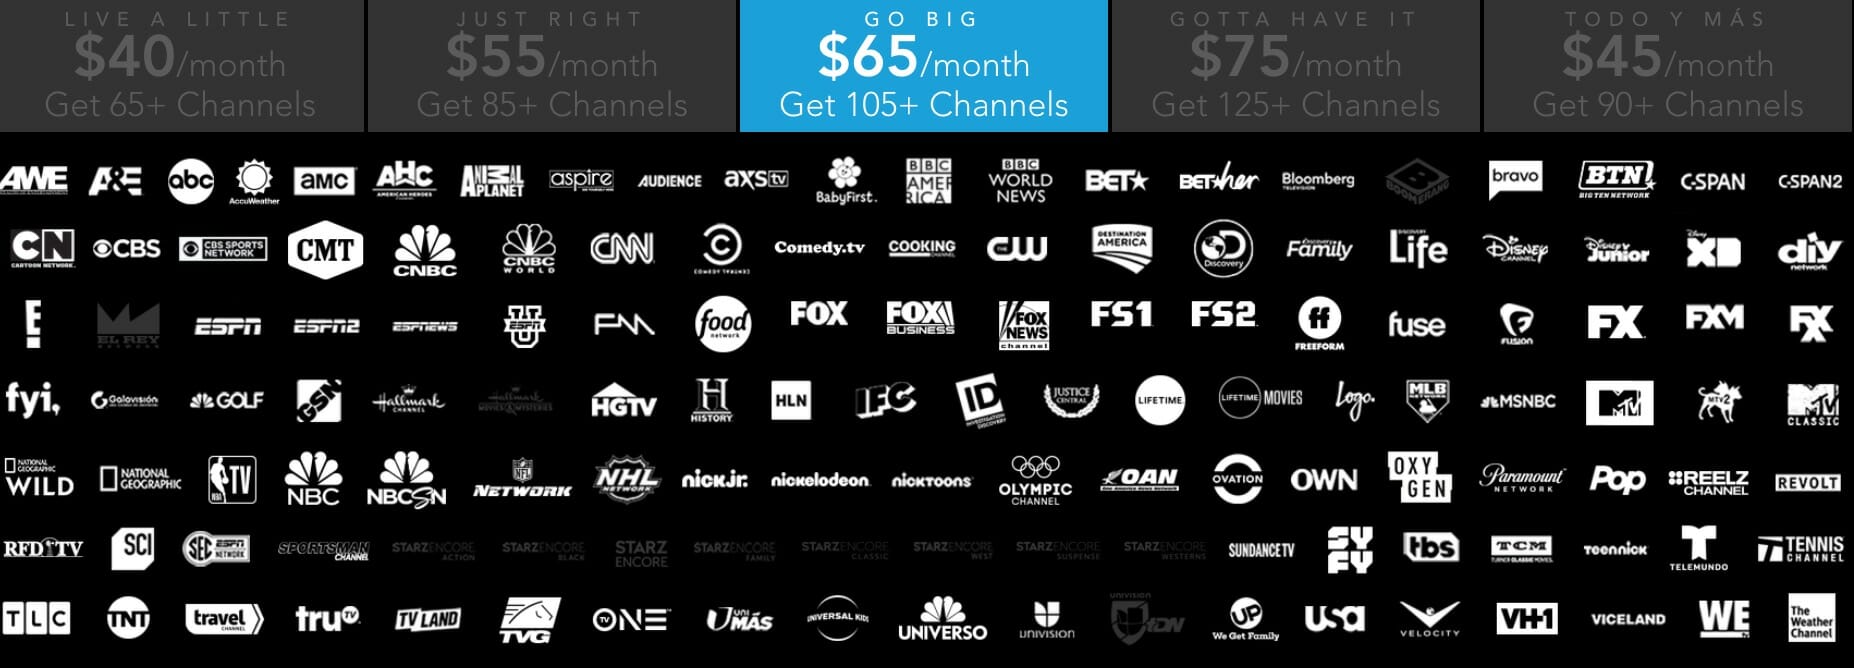 show me directv packages